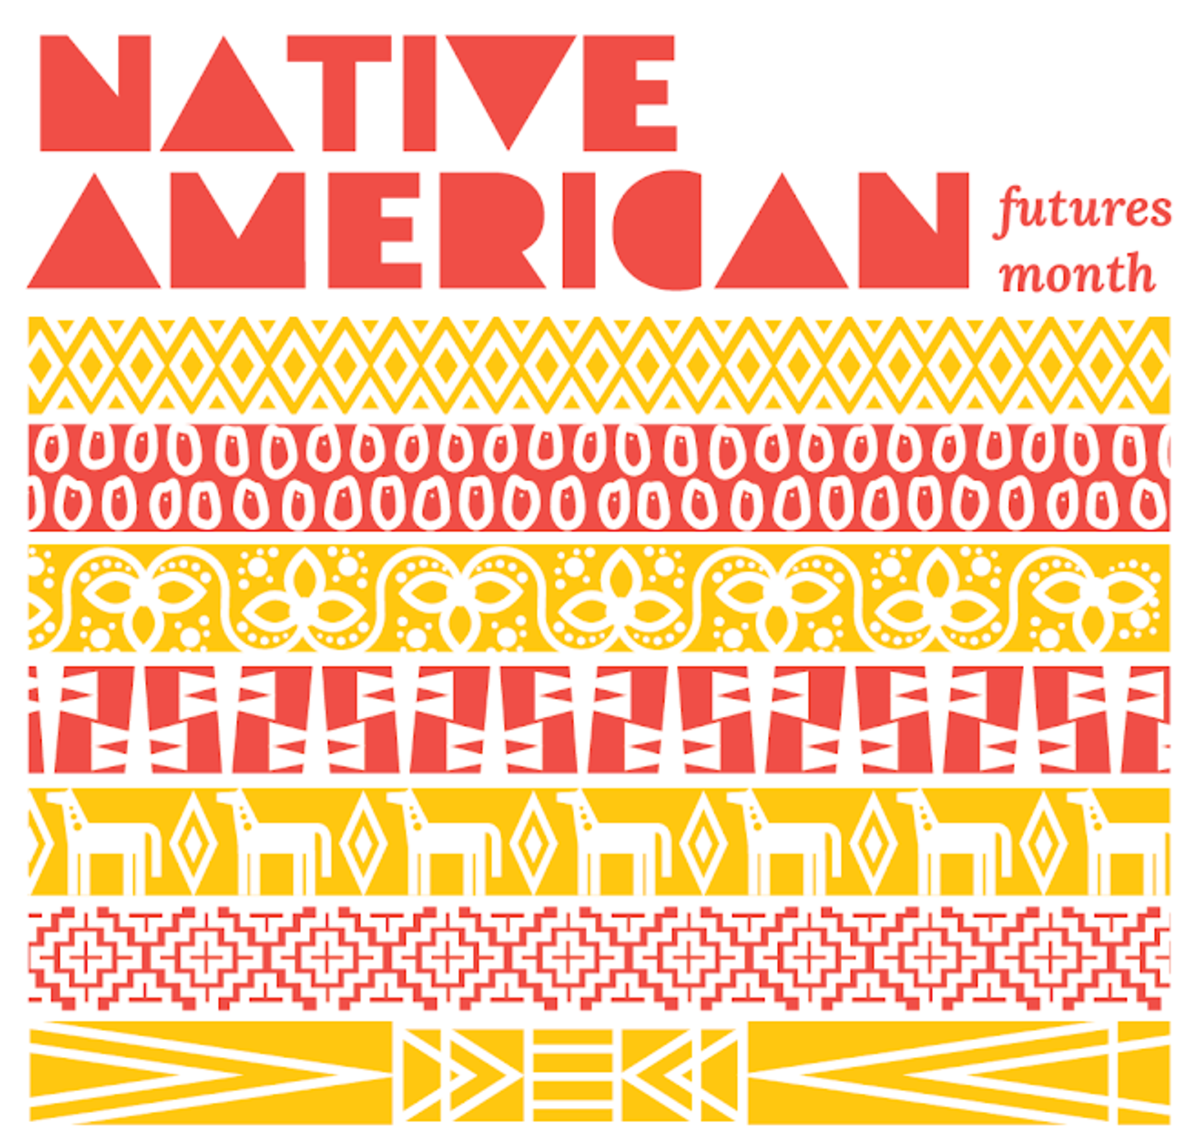 Native American futures month key graphic